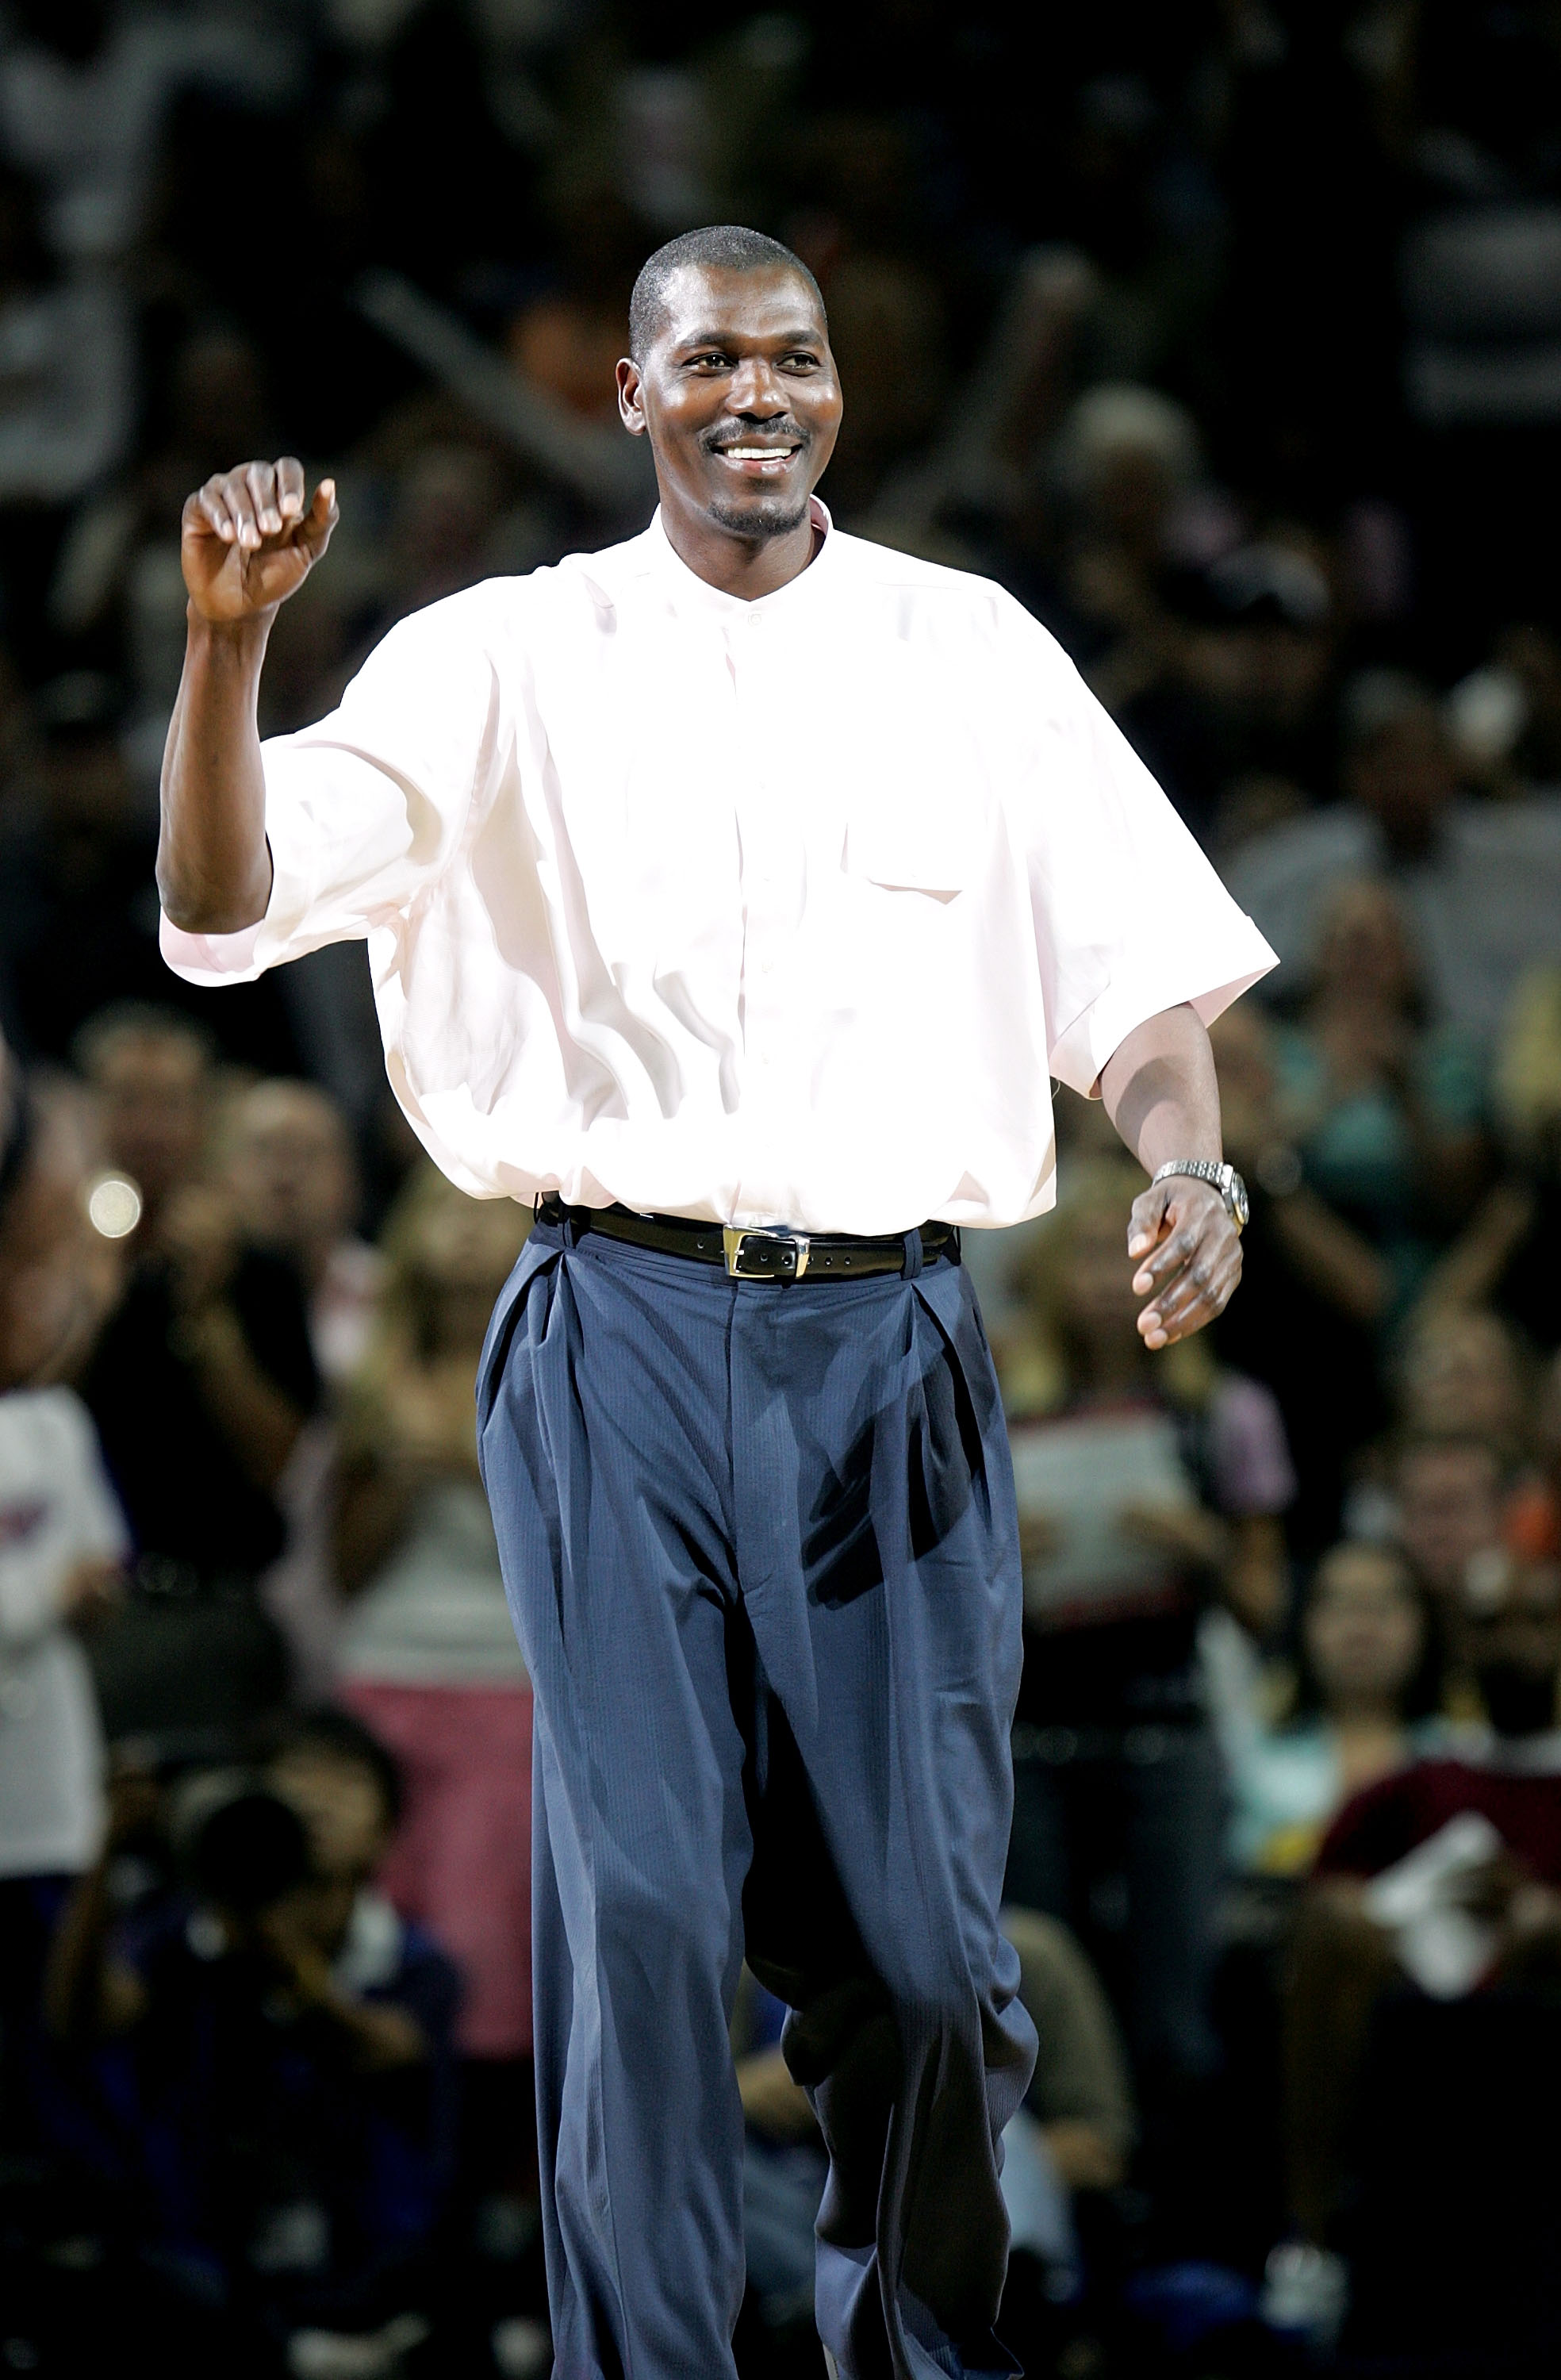 SAN ANTONIO - JUNE 9:  NBA legend Hakeem Olajuwon is introduced to the crowd during the game between the San Antonio Spurs and the Detroit Pistons in Game one of the 2005 NBA Finals at SBC Center on June 9, 2005 in San Antonio, Texas.  NOTE TO USER: User